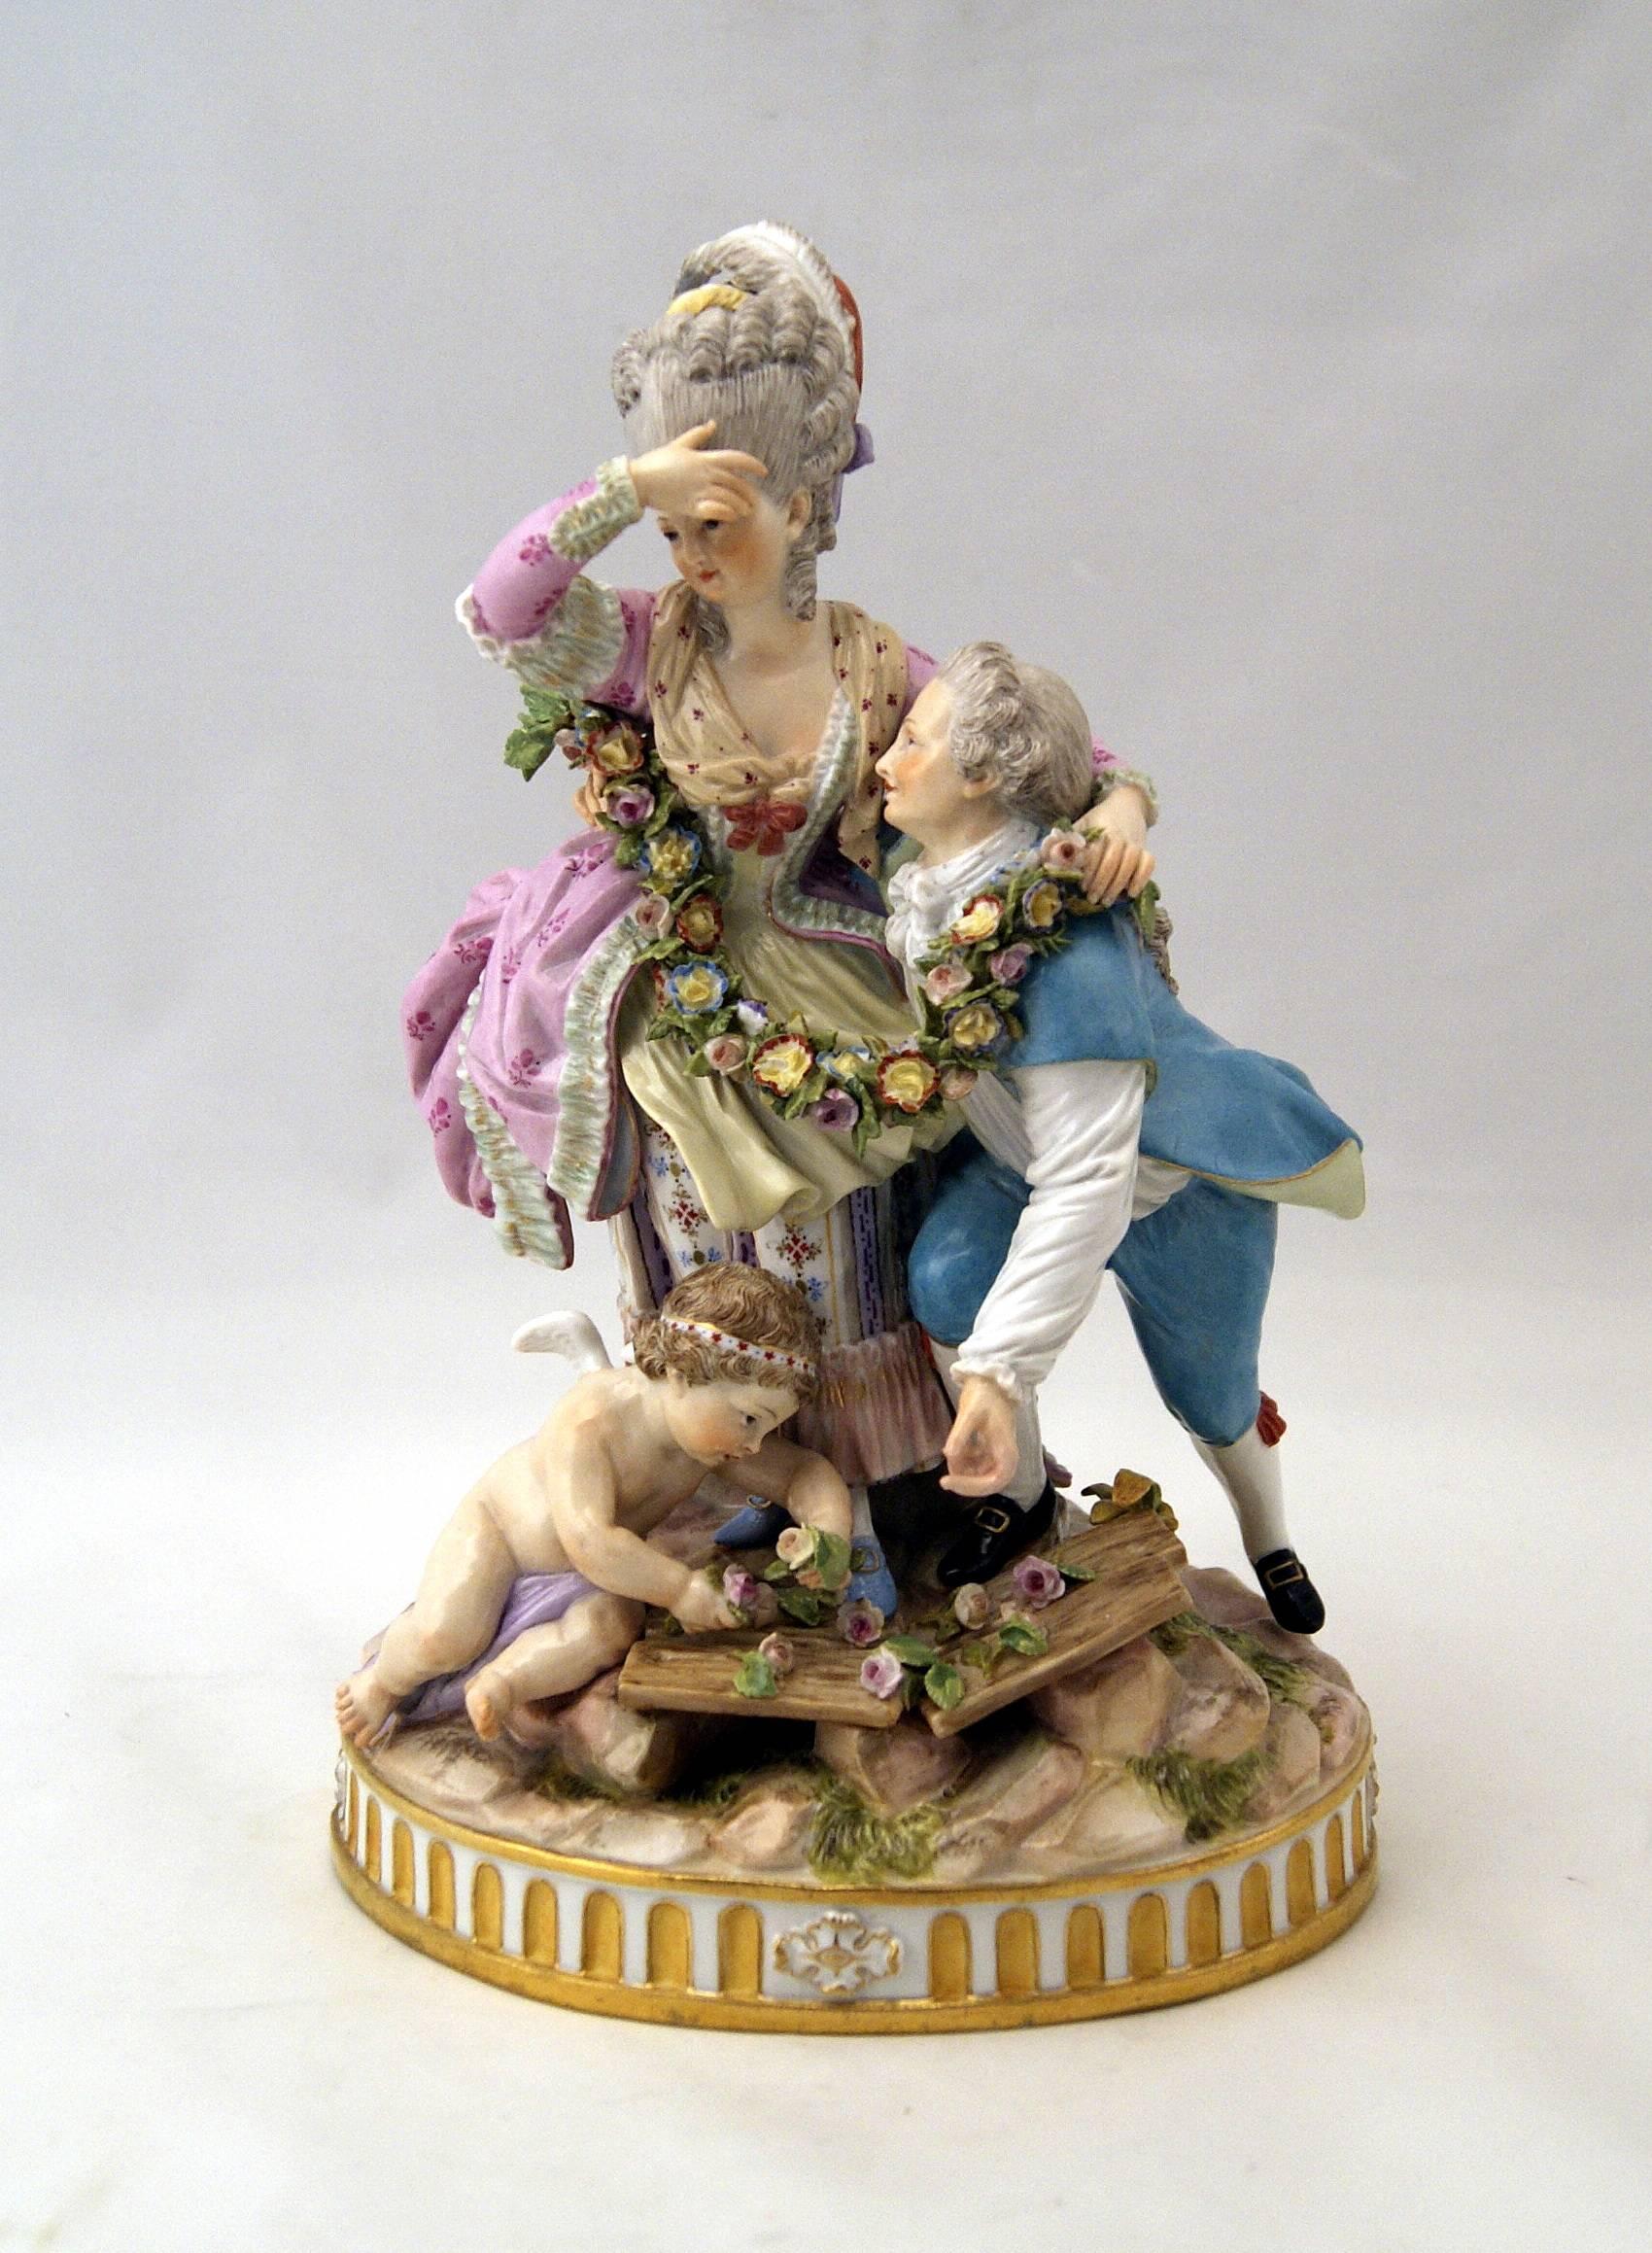 Meissen Pair of Gorgeous Figurines of finest quality:
-- The Broken Eggs
-- The Broken Bridge

Manufactory: Meissen
Dating: Middle of 19th century
Made circa 1850-1860
MARKS: Blue Meissen sword mark of 19th century (with pommels on hilts)